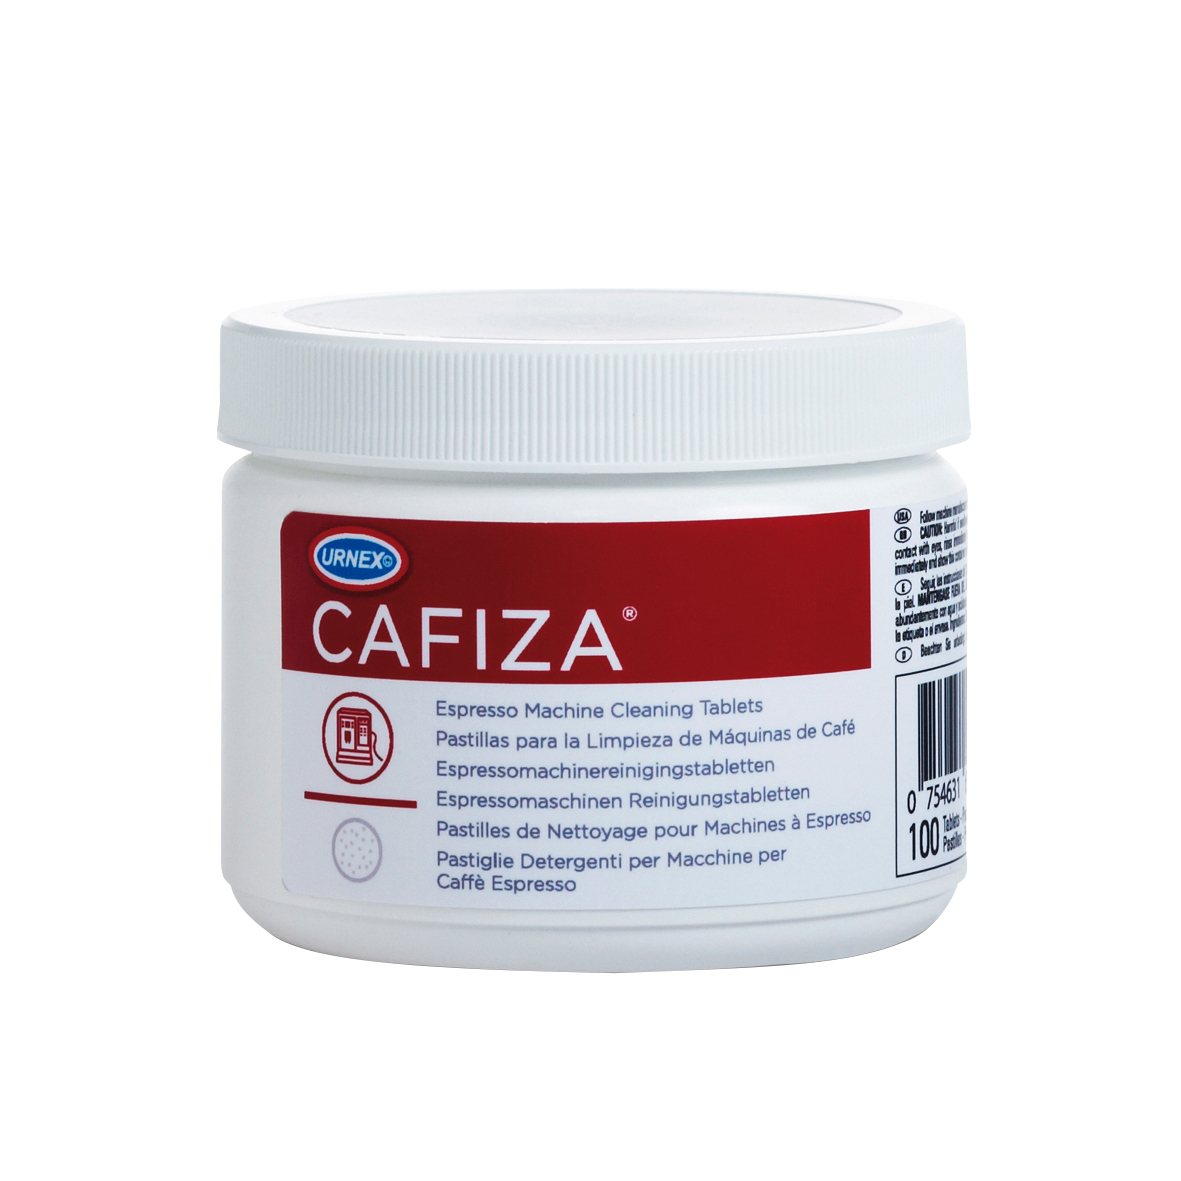 Cafiza Cleaning Tablets, 1.2 g